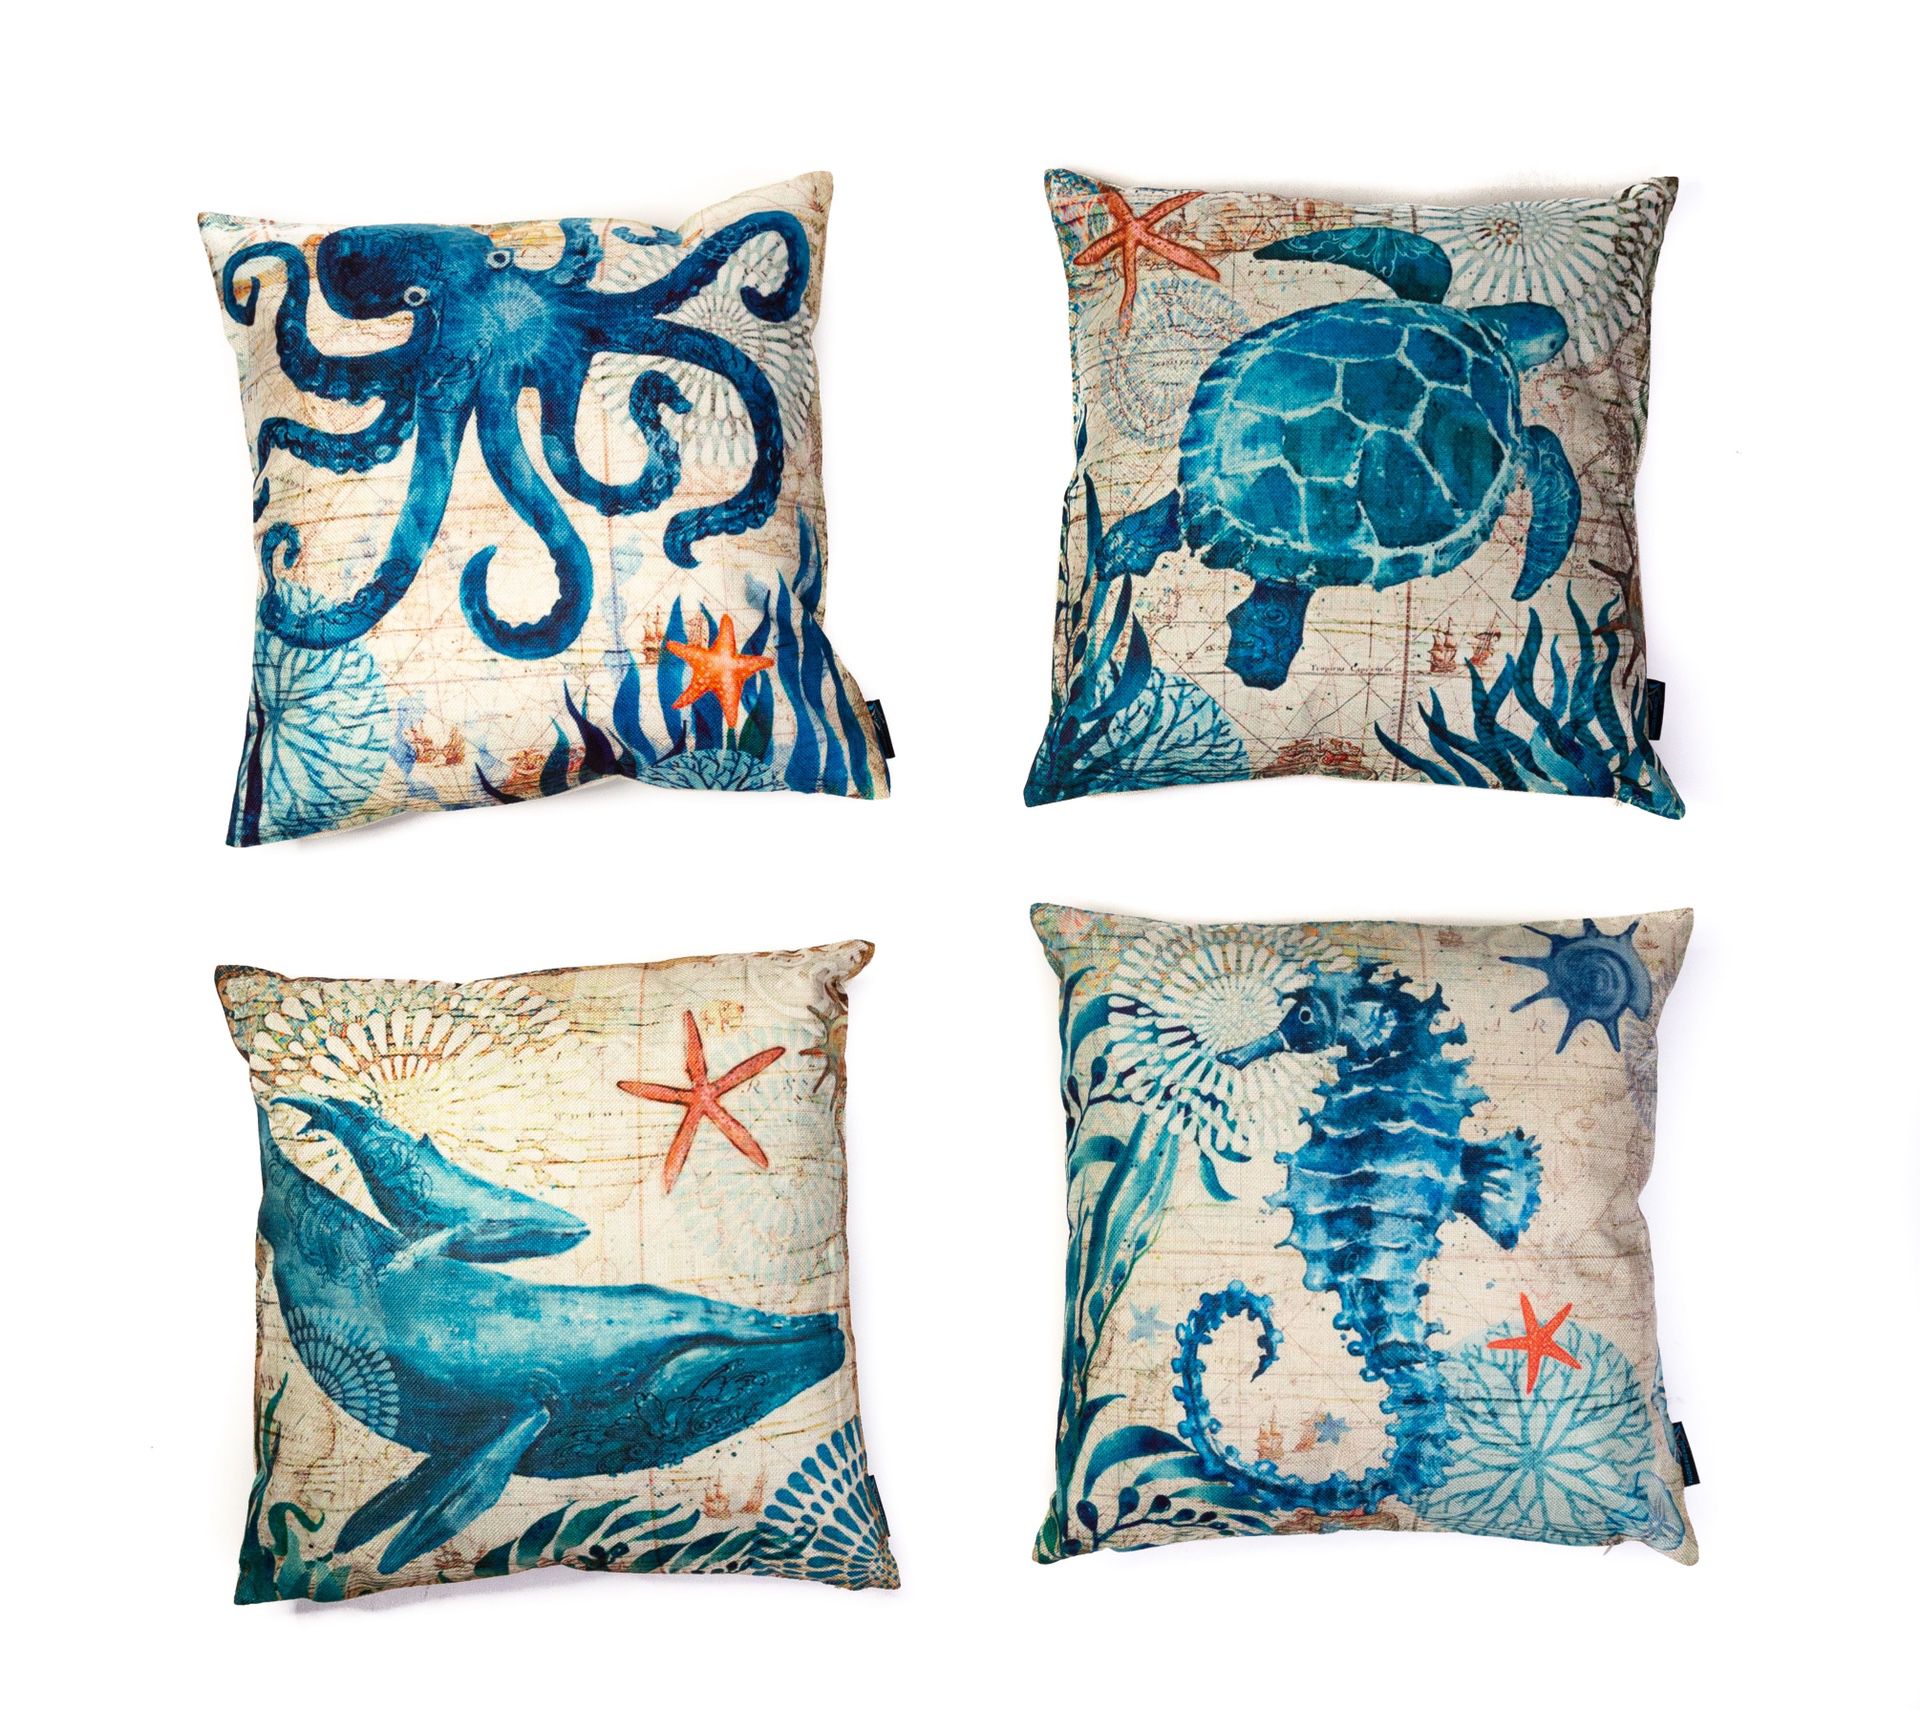 Sea Life Throw Square Cushion Cover | Pack Of 4 | Mediterranean Style Pillow Cases | Blue Ocean Theme | Cotton-Linen Fabric | Home Décor | 18” x 18” |